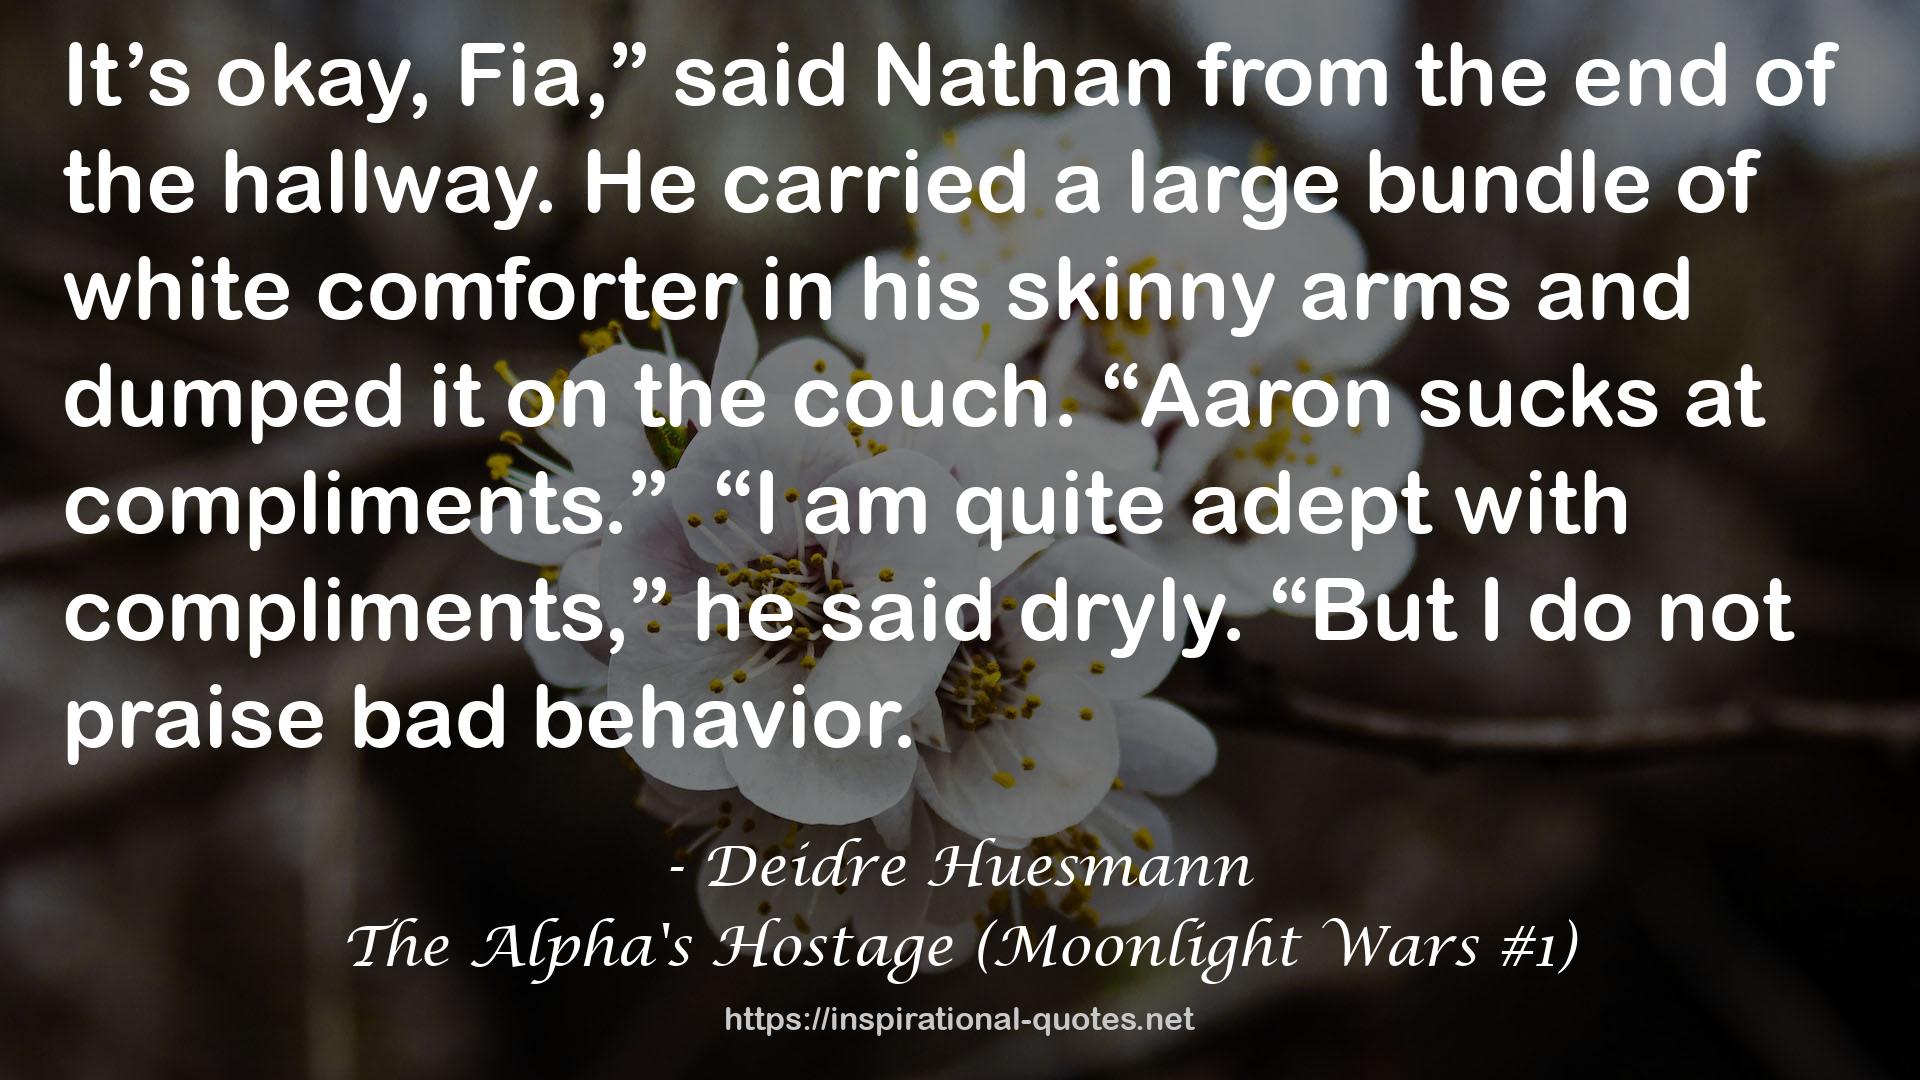 The Alpha's Hostage (Moonlight Wars #1) QUOTES